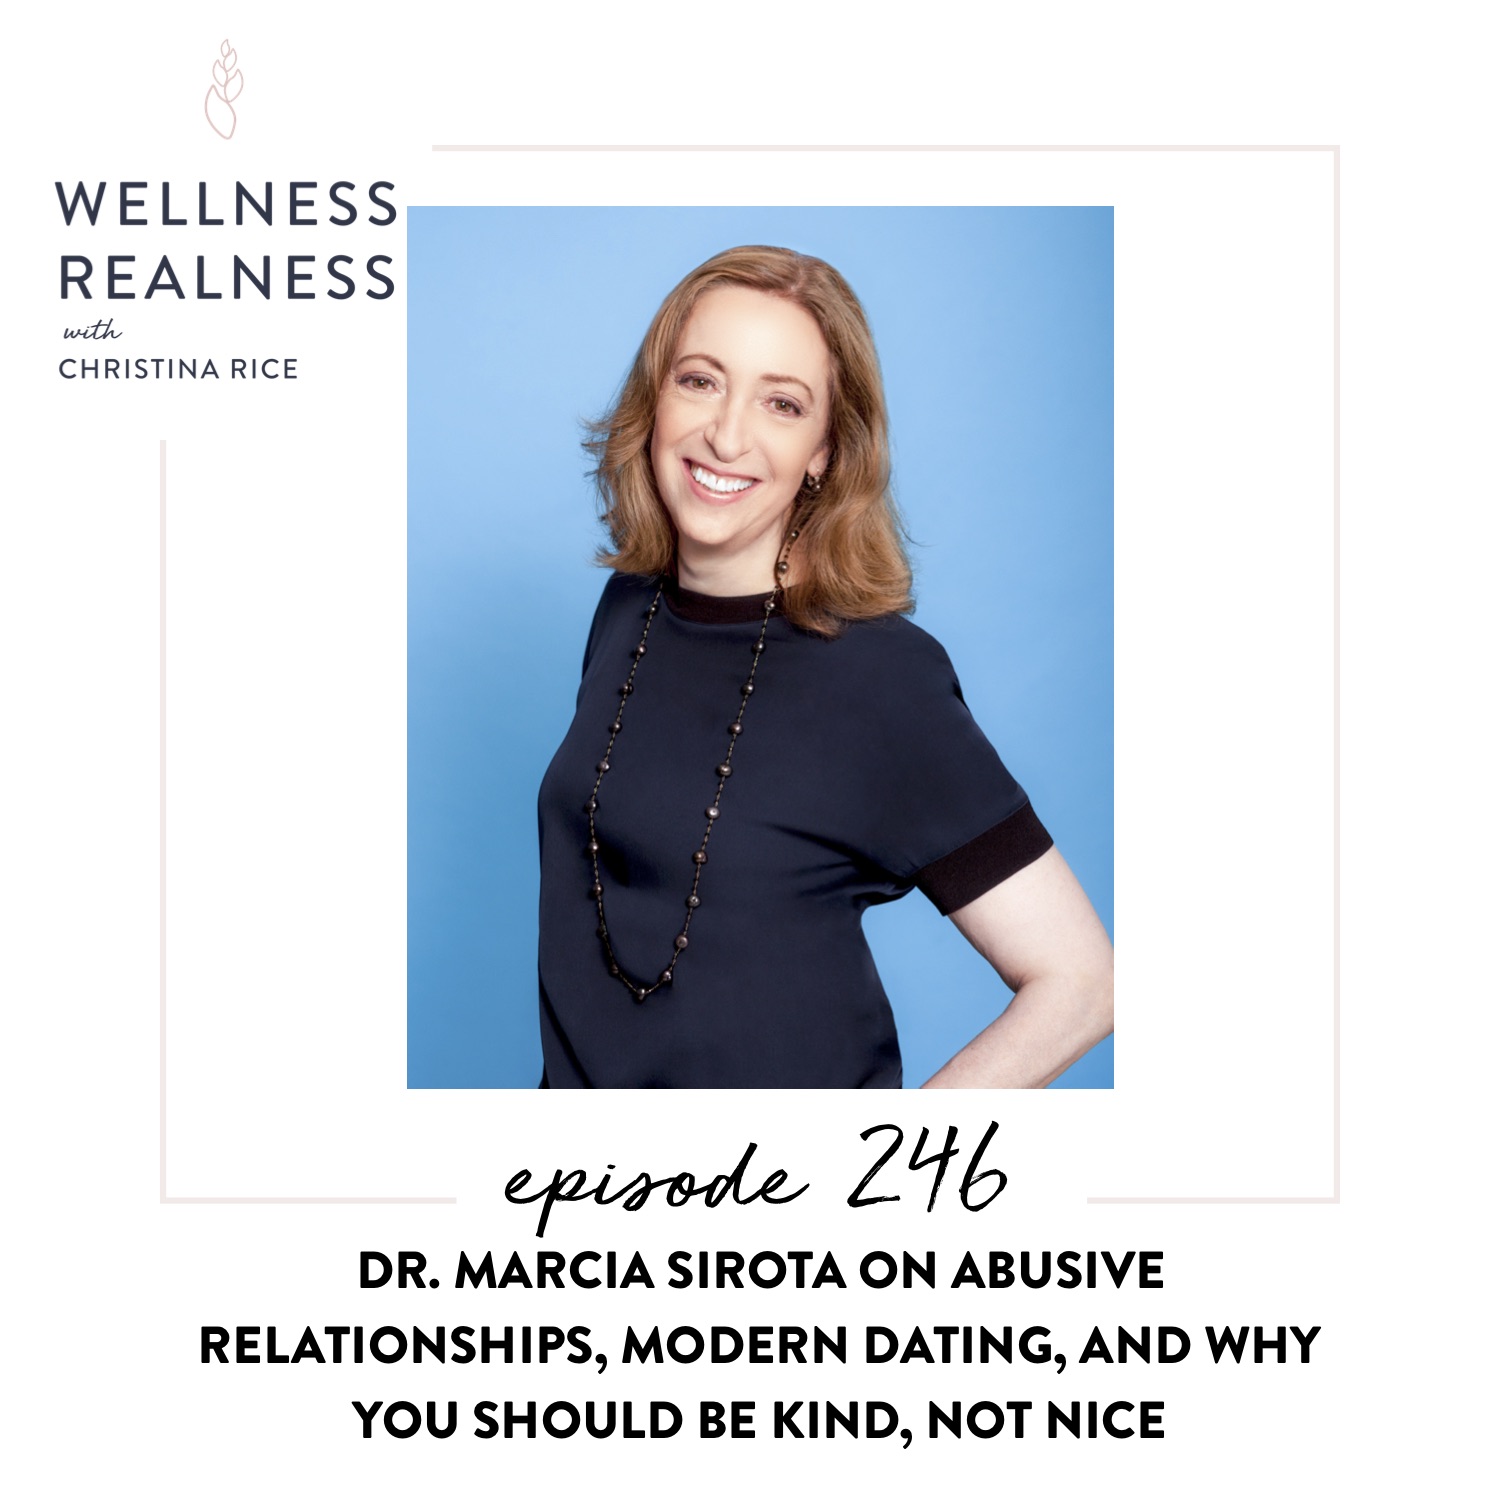 246: Dr. Marcia Sirota on Abusive Relationships, Modern Dating, and Why You Should be Kind, Not Nice